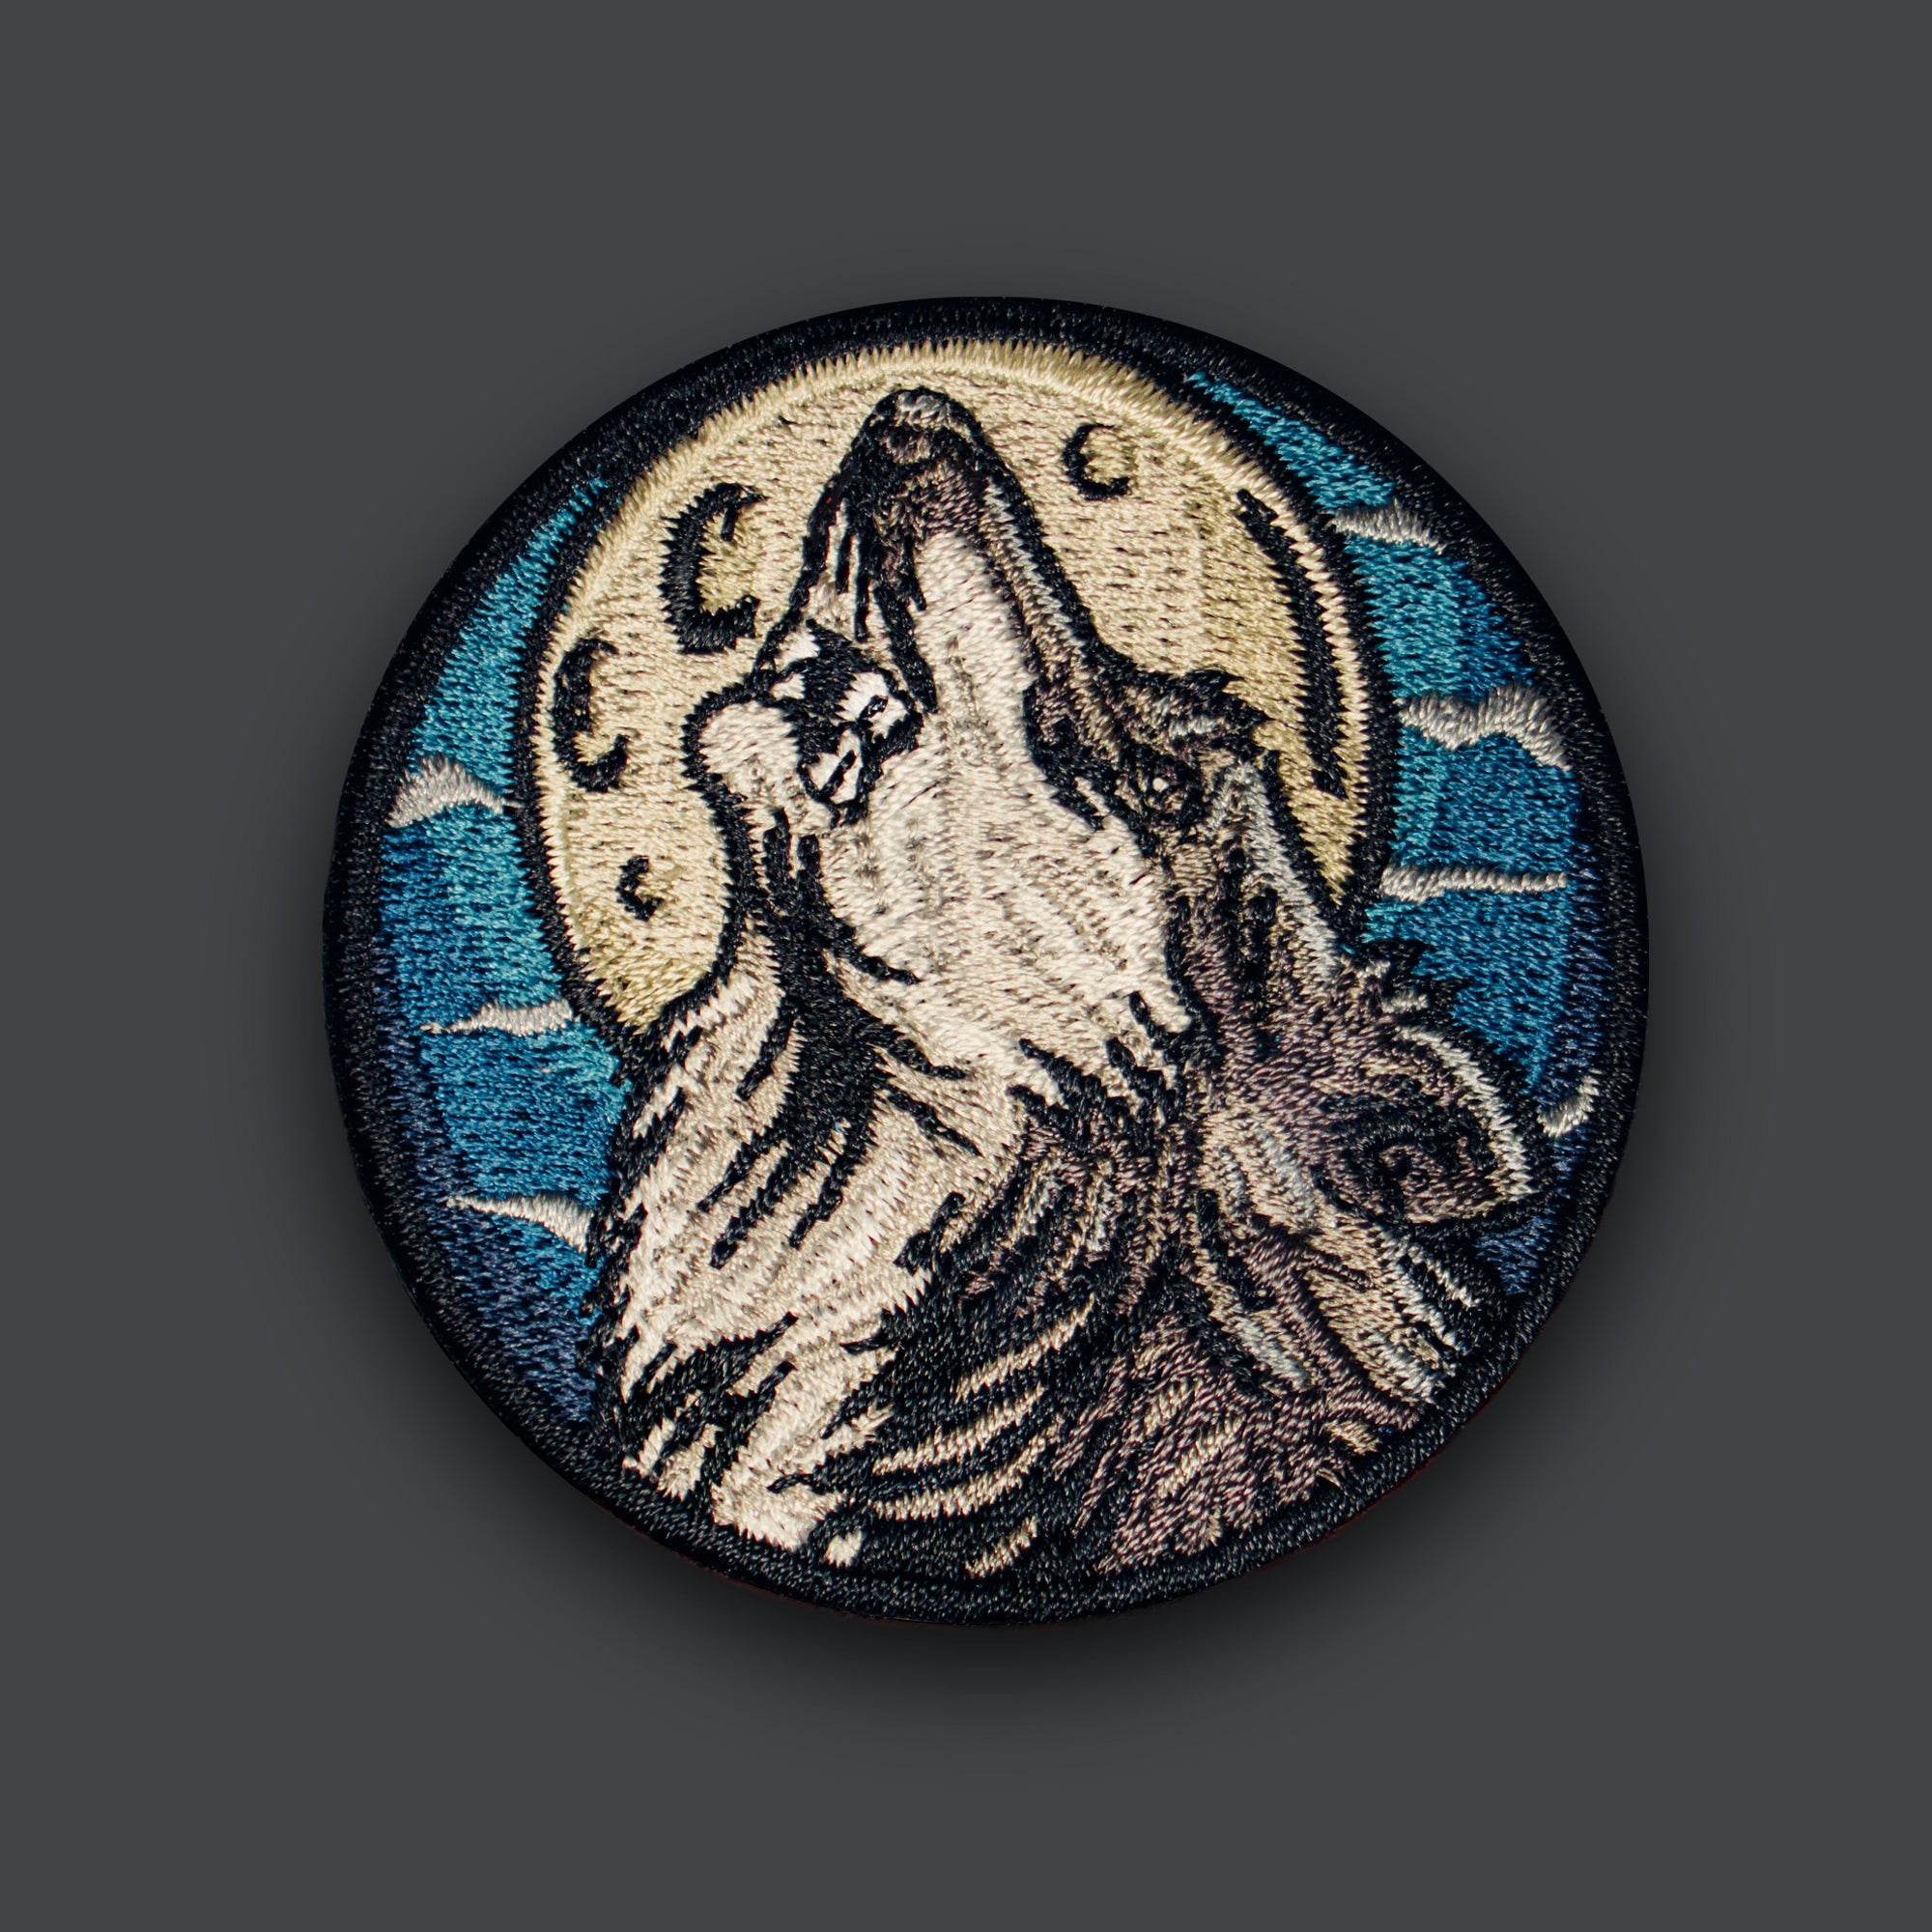 Wildlife V8 "Timber Wolf" Morale Patch